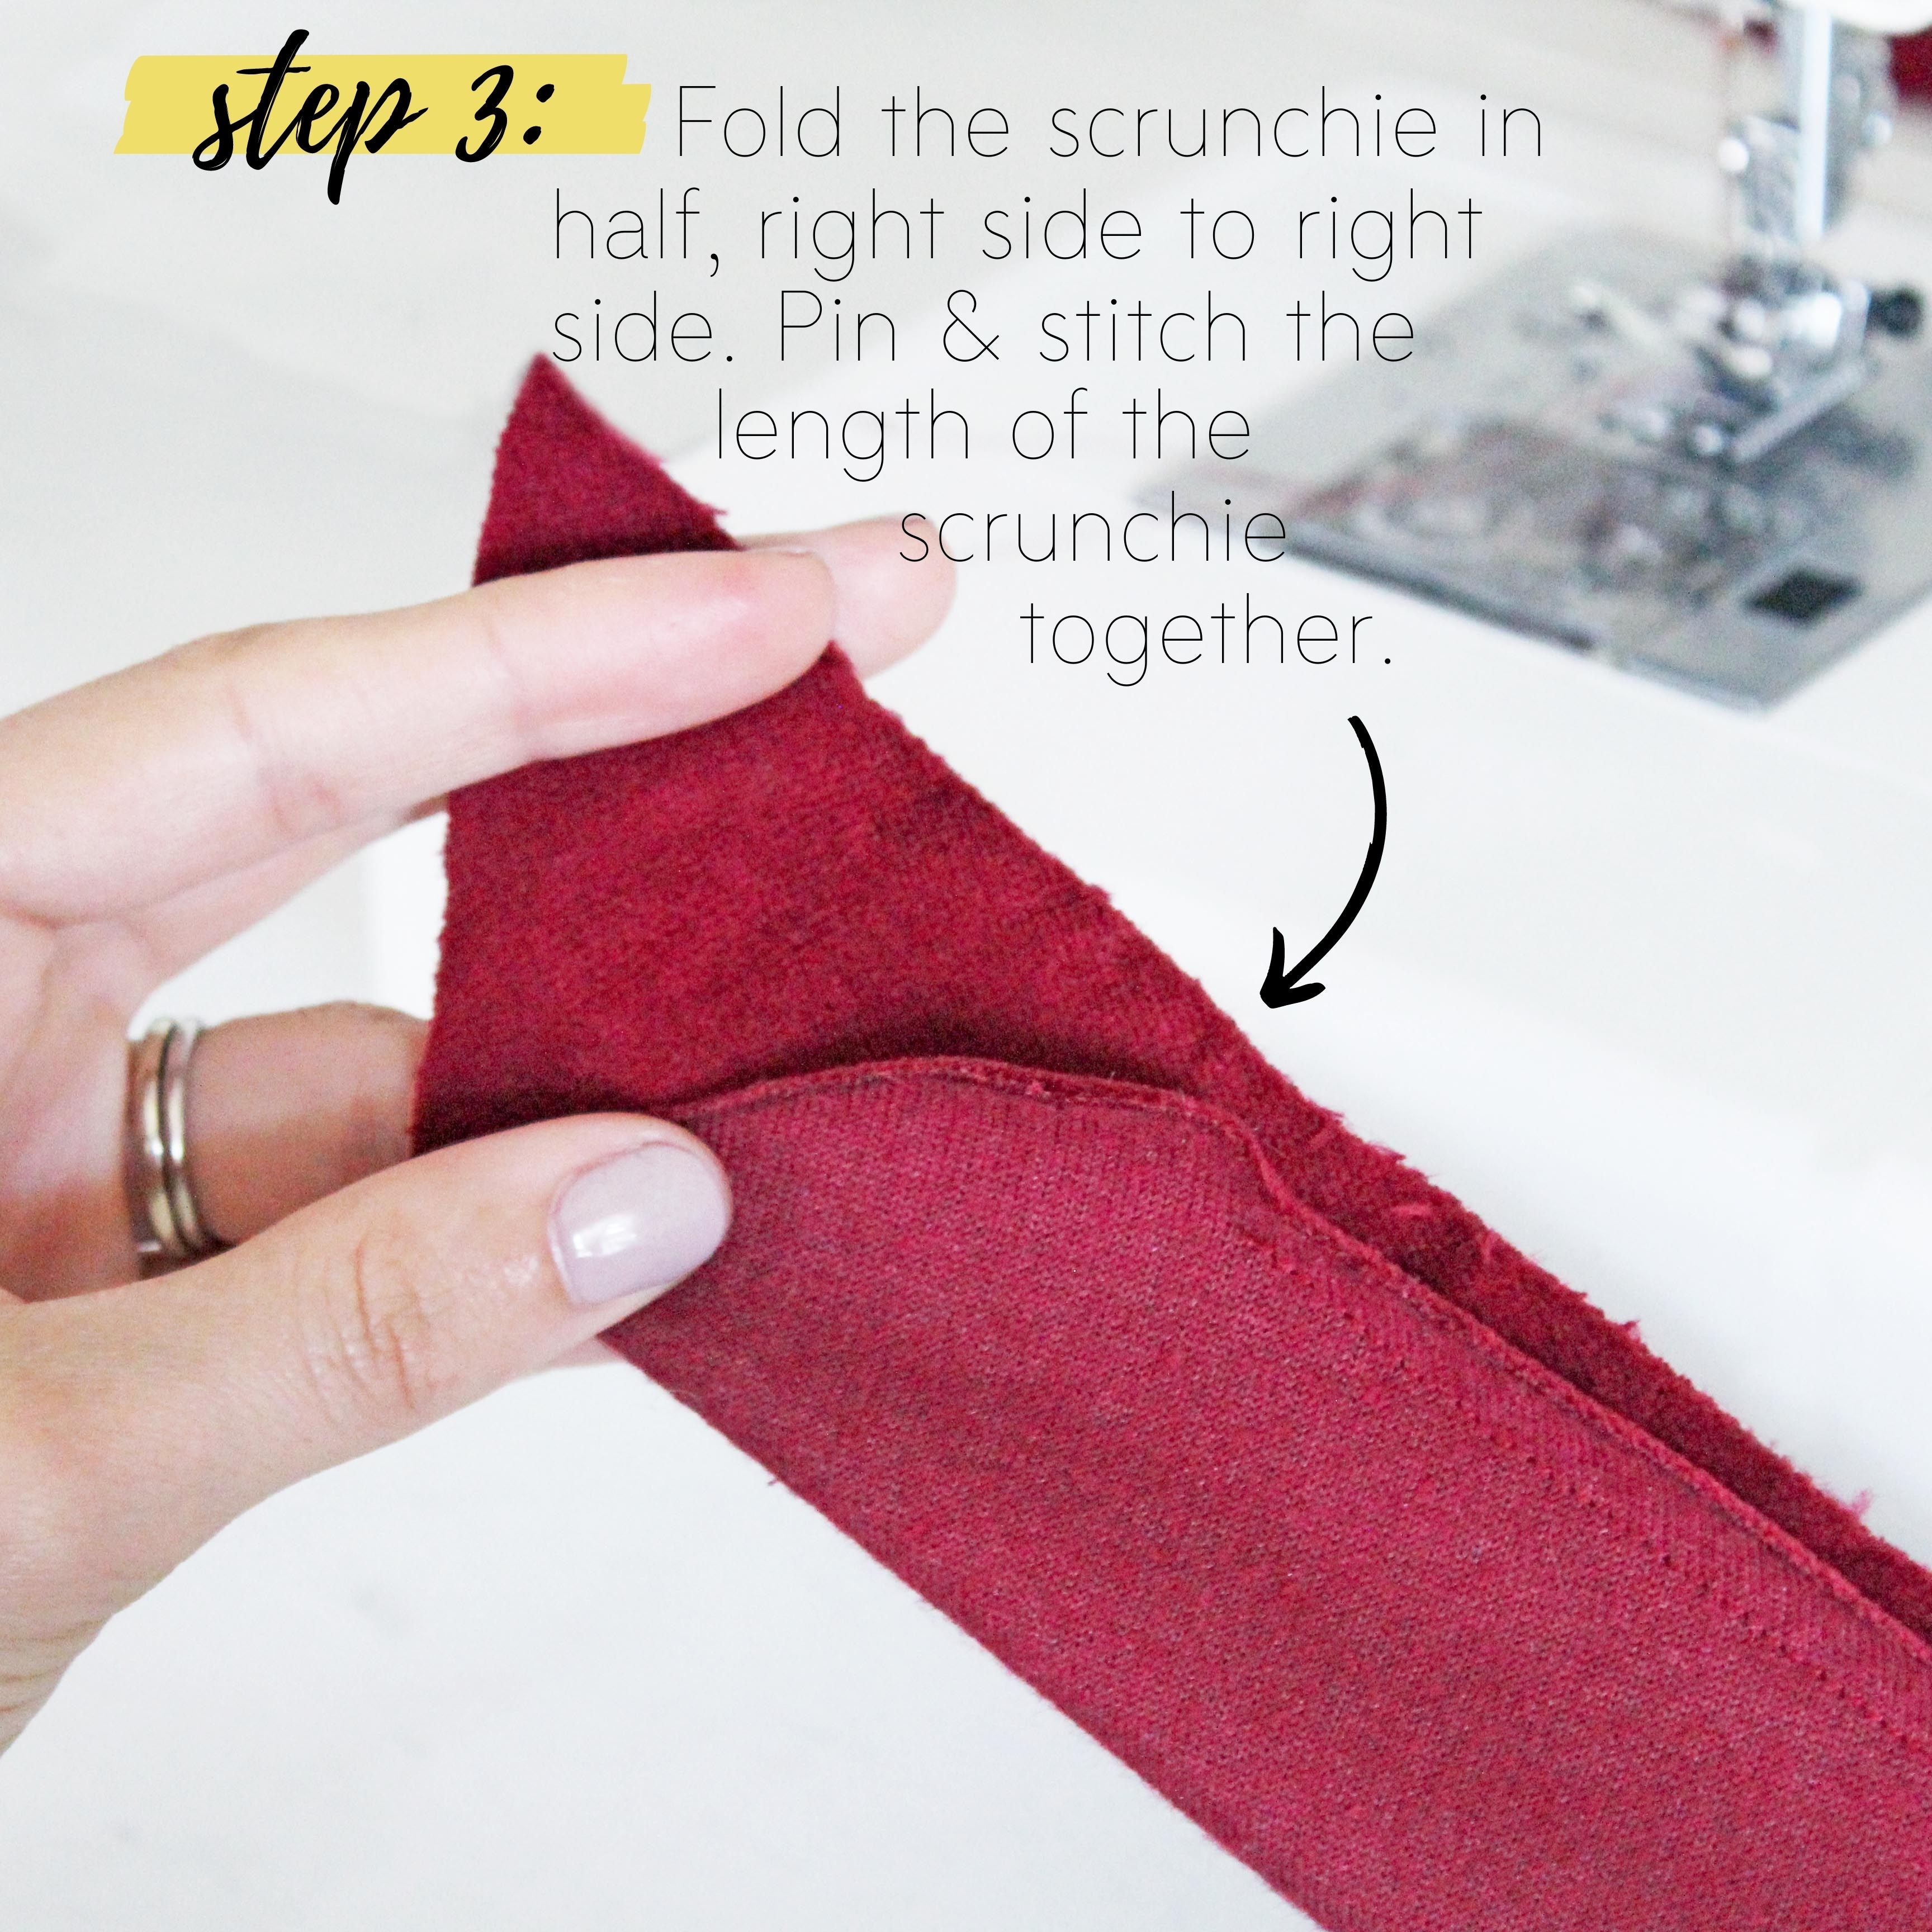 How To Make A Scrunchie DIY Sewing Tutorial: Step 3